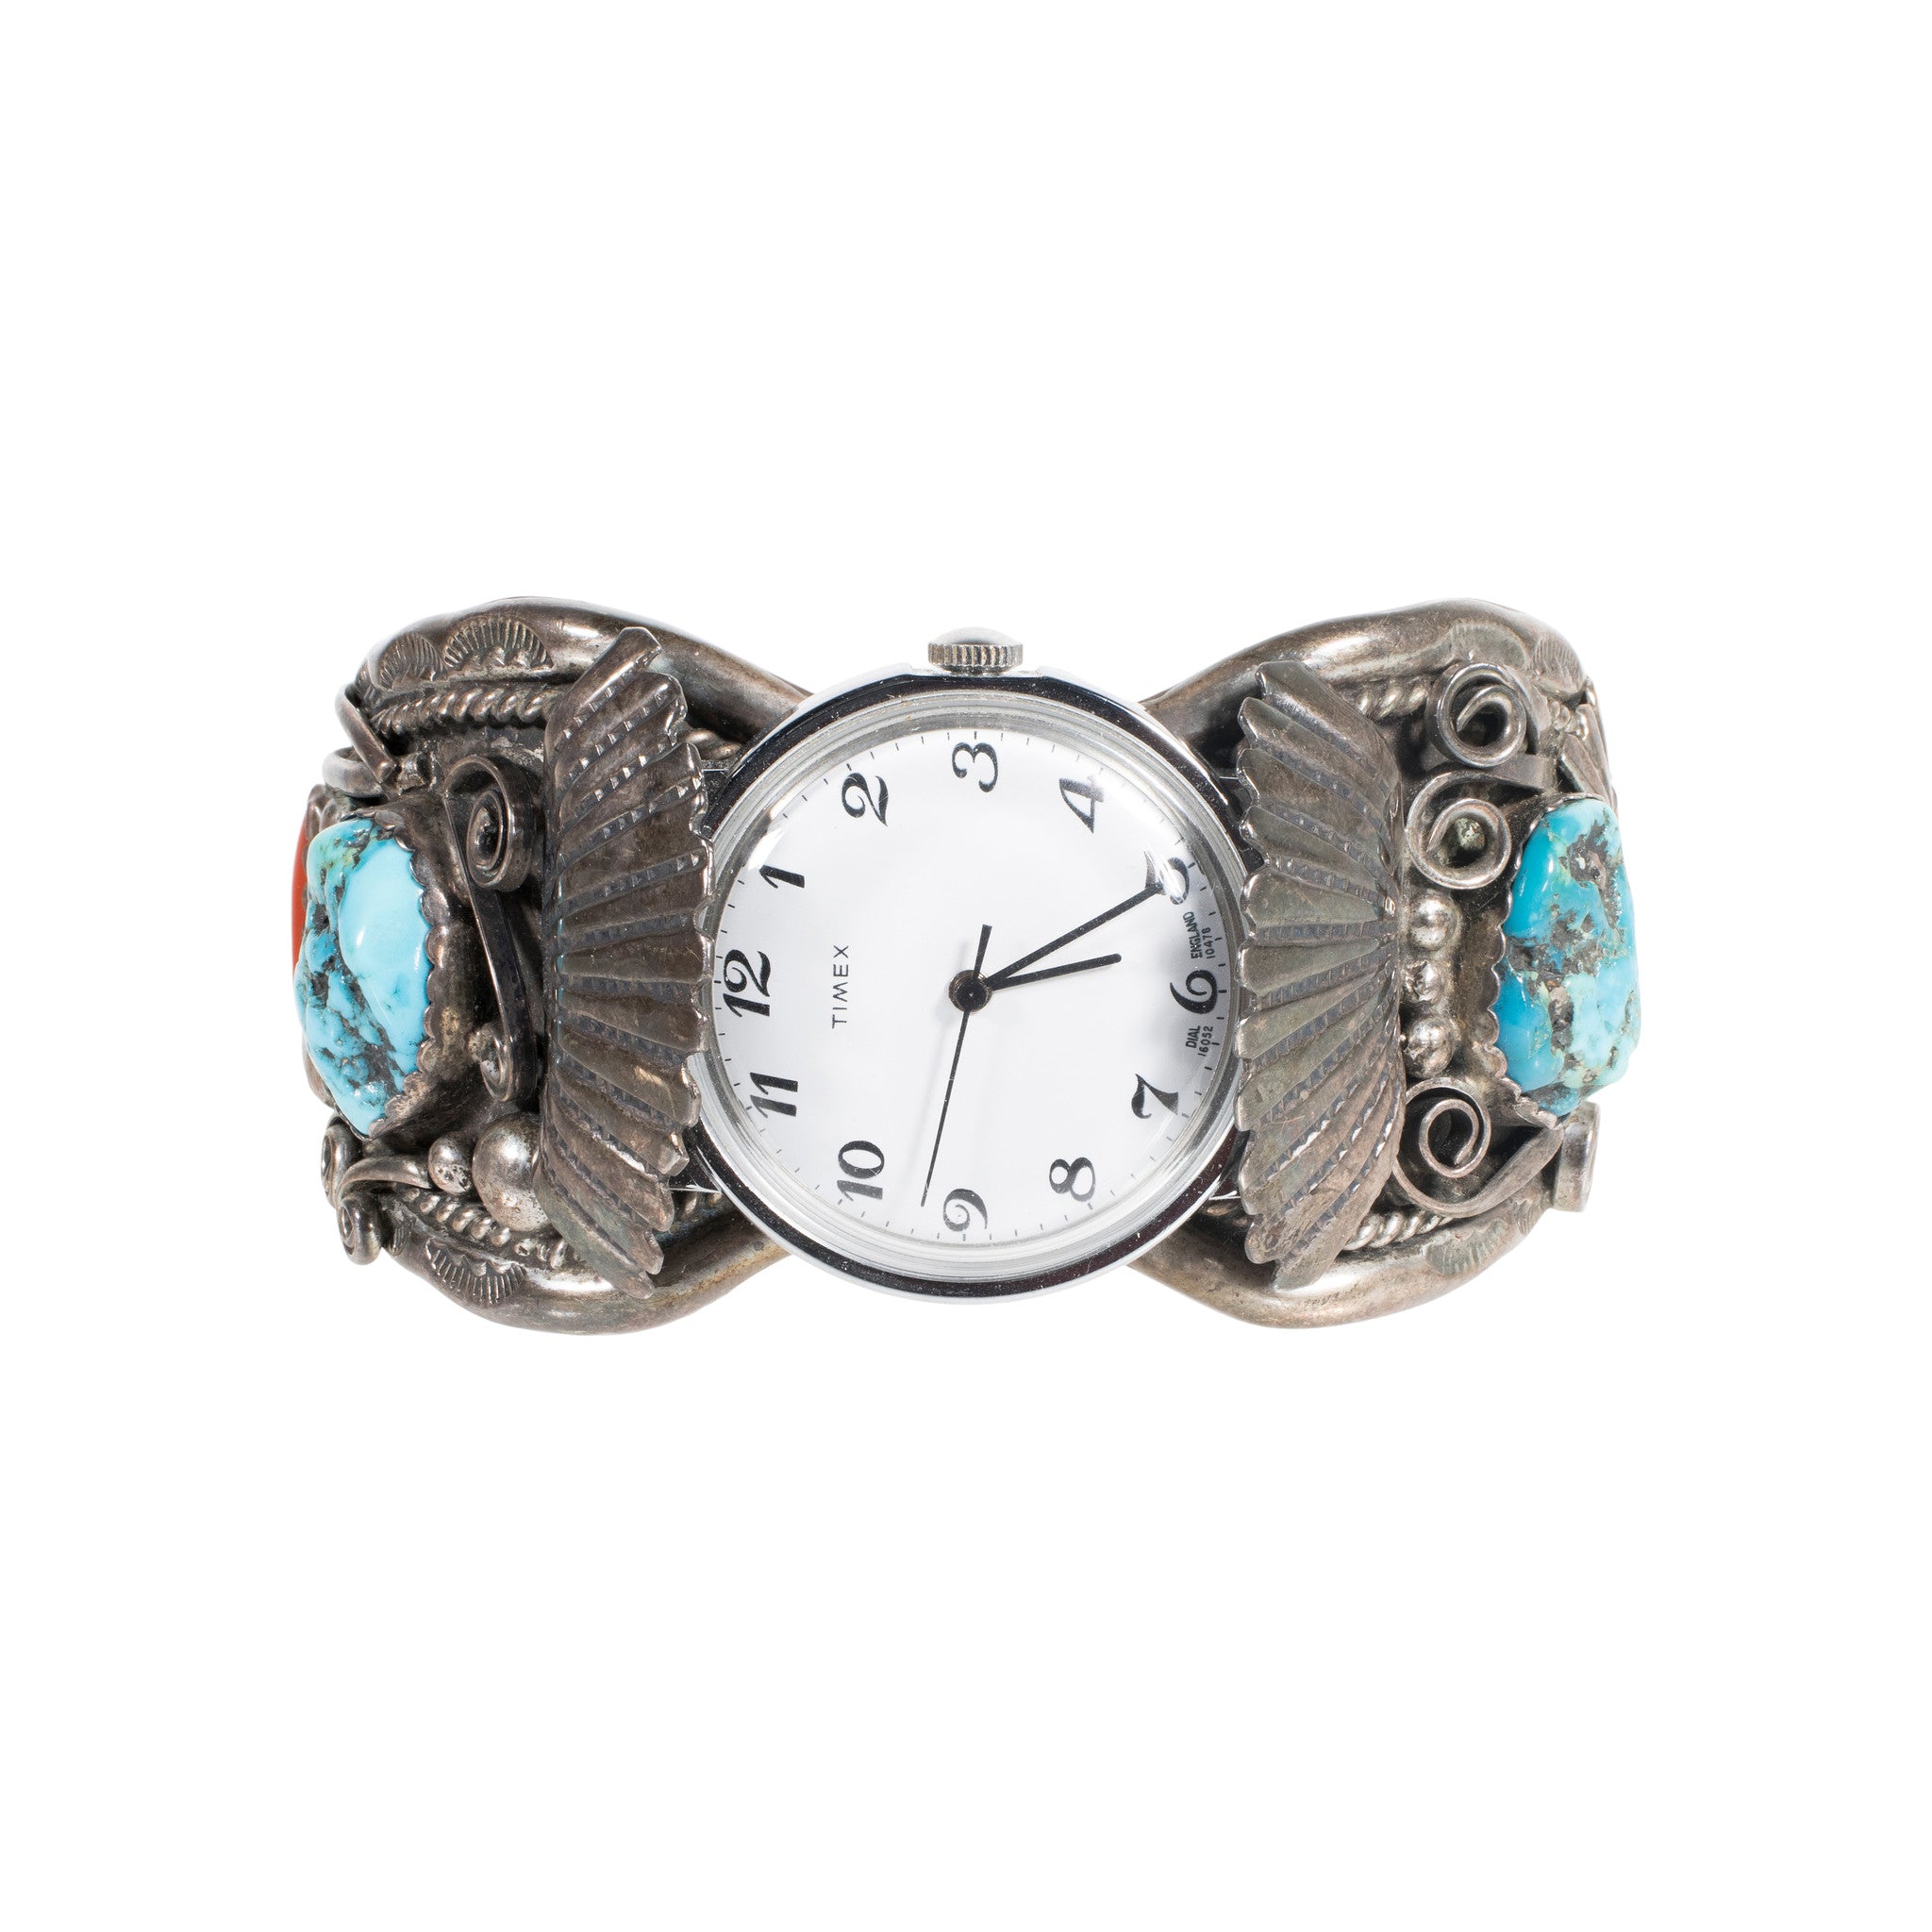 Navajo Turquoise and Coral Watchband